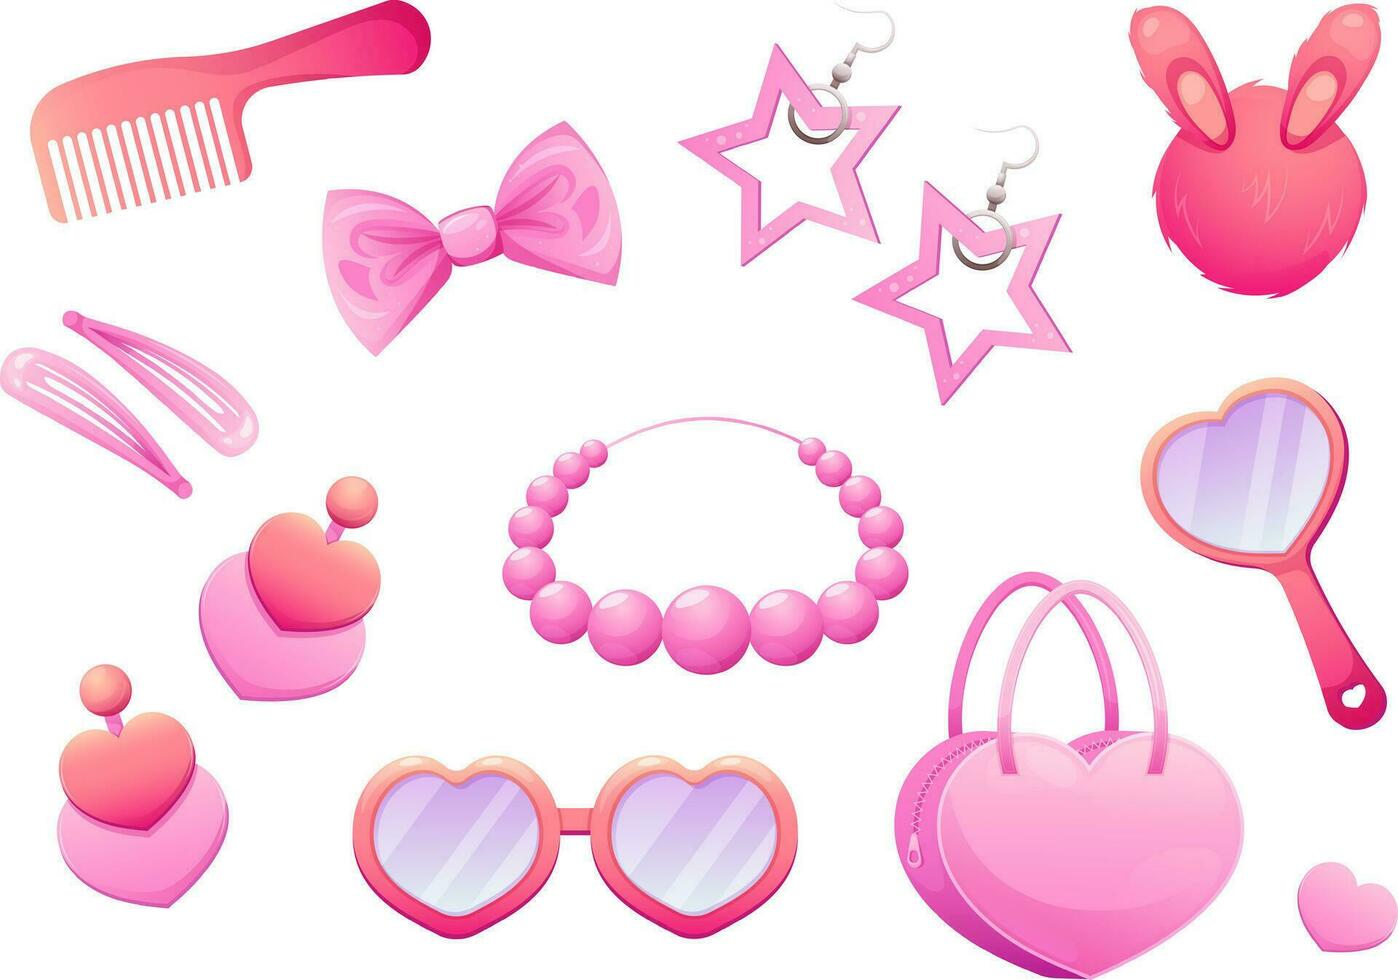 Set of trendy pink accessories and jewelry for dolls, princesses, girls. Star earrings, hearts, beads, bag, hairpin. vector